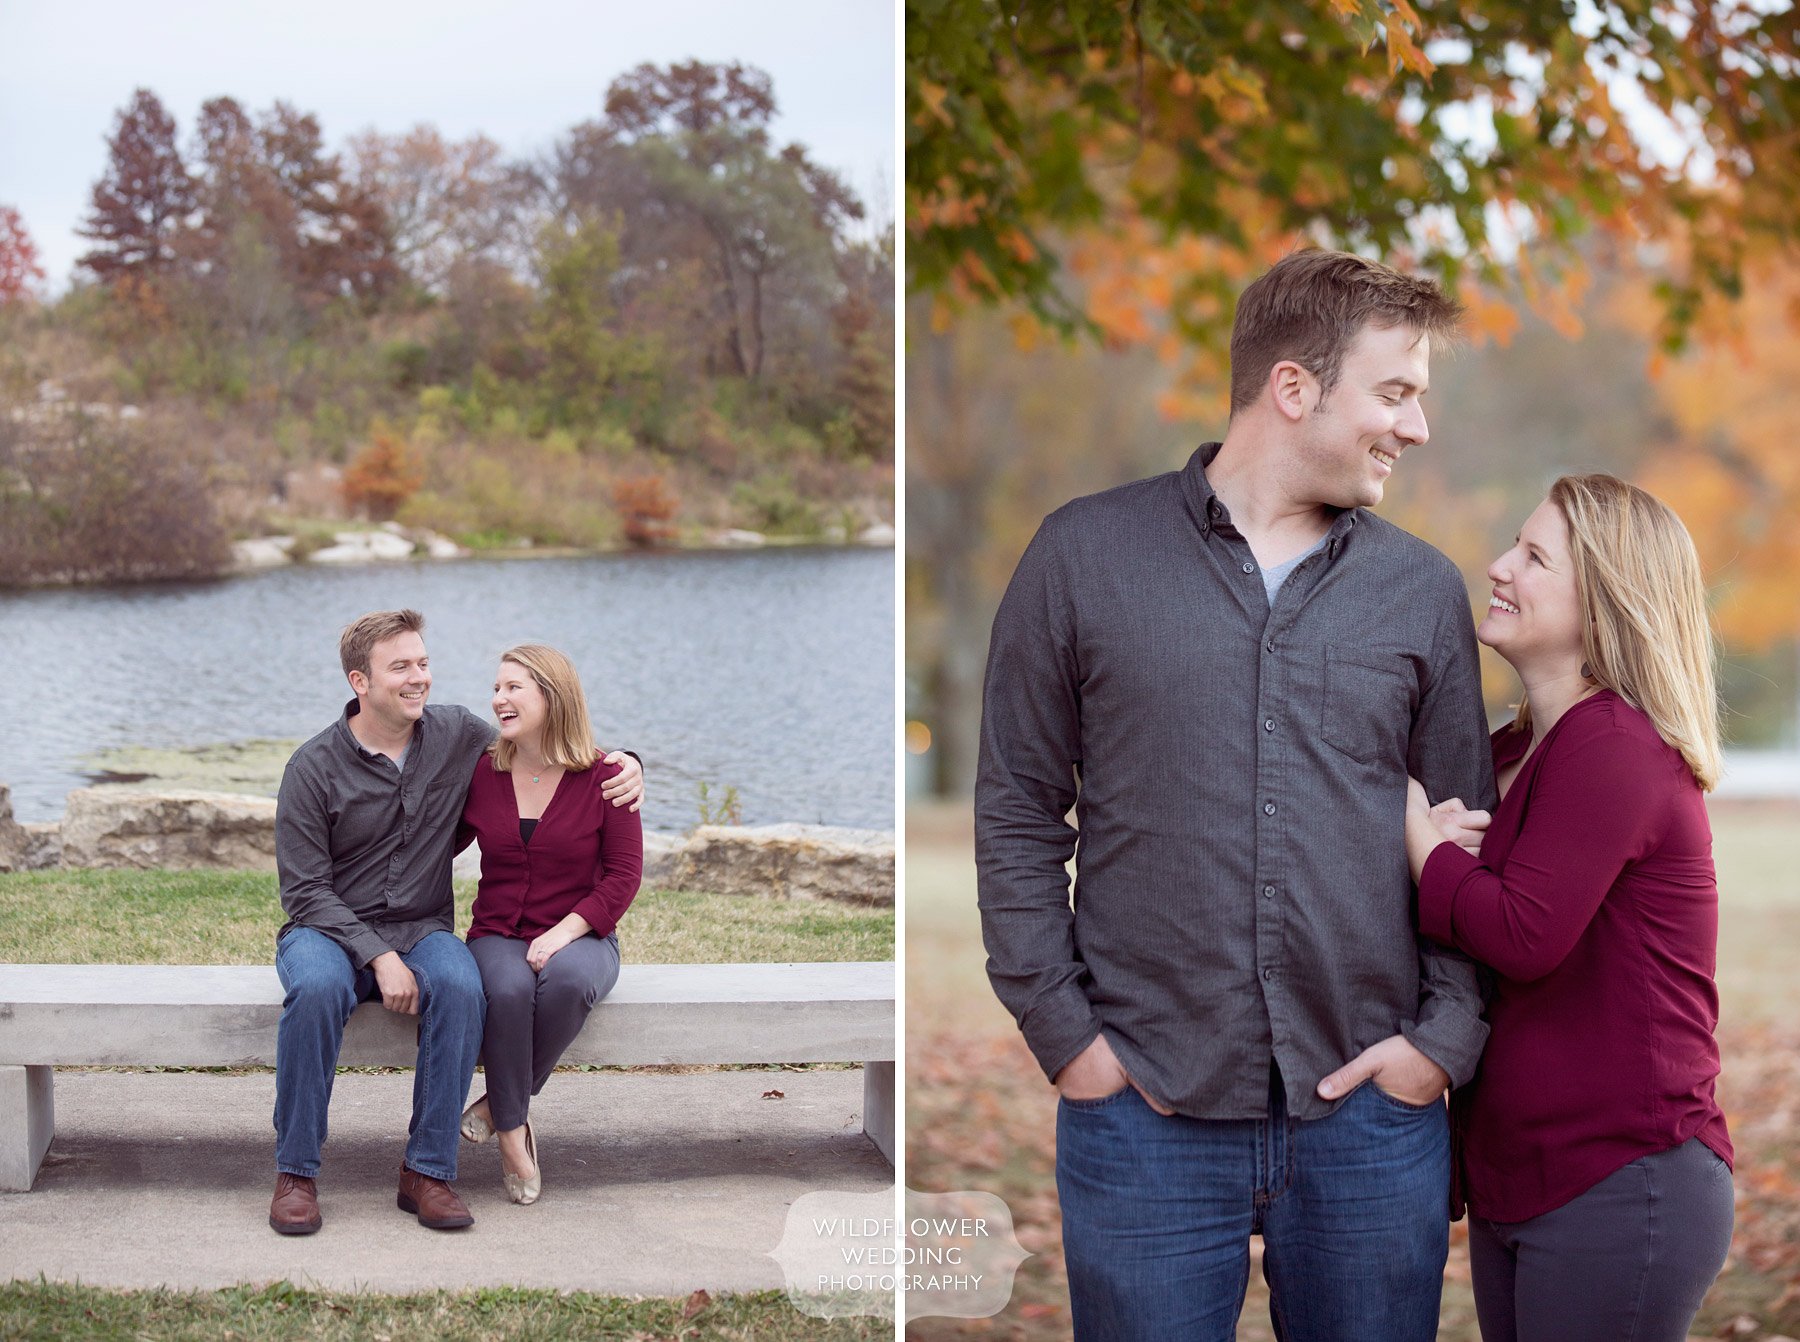 Here is a great example of a journalistic engagement photography session in Columbia, MO at Stephen's Lake Park.